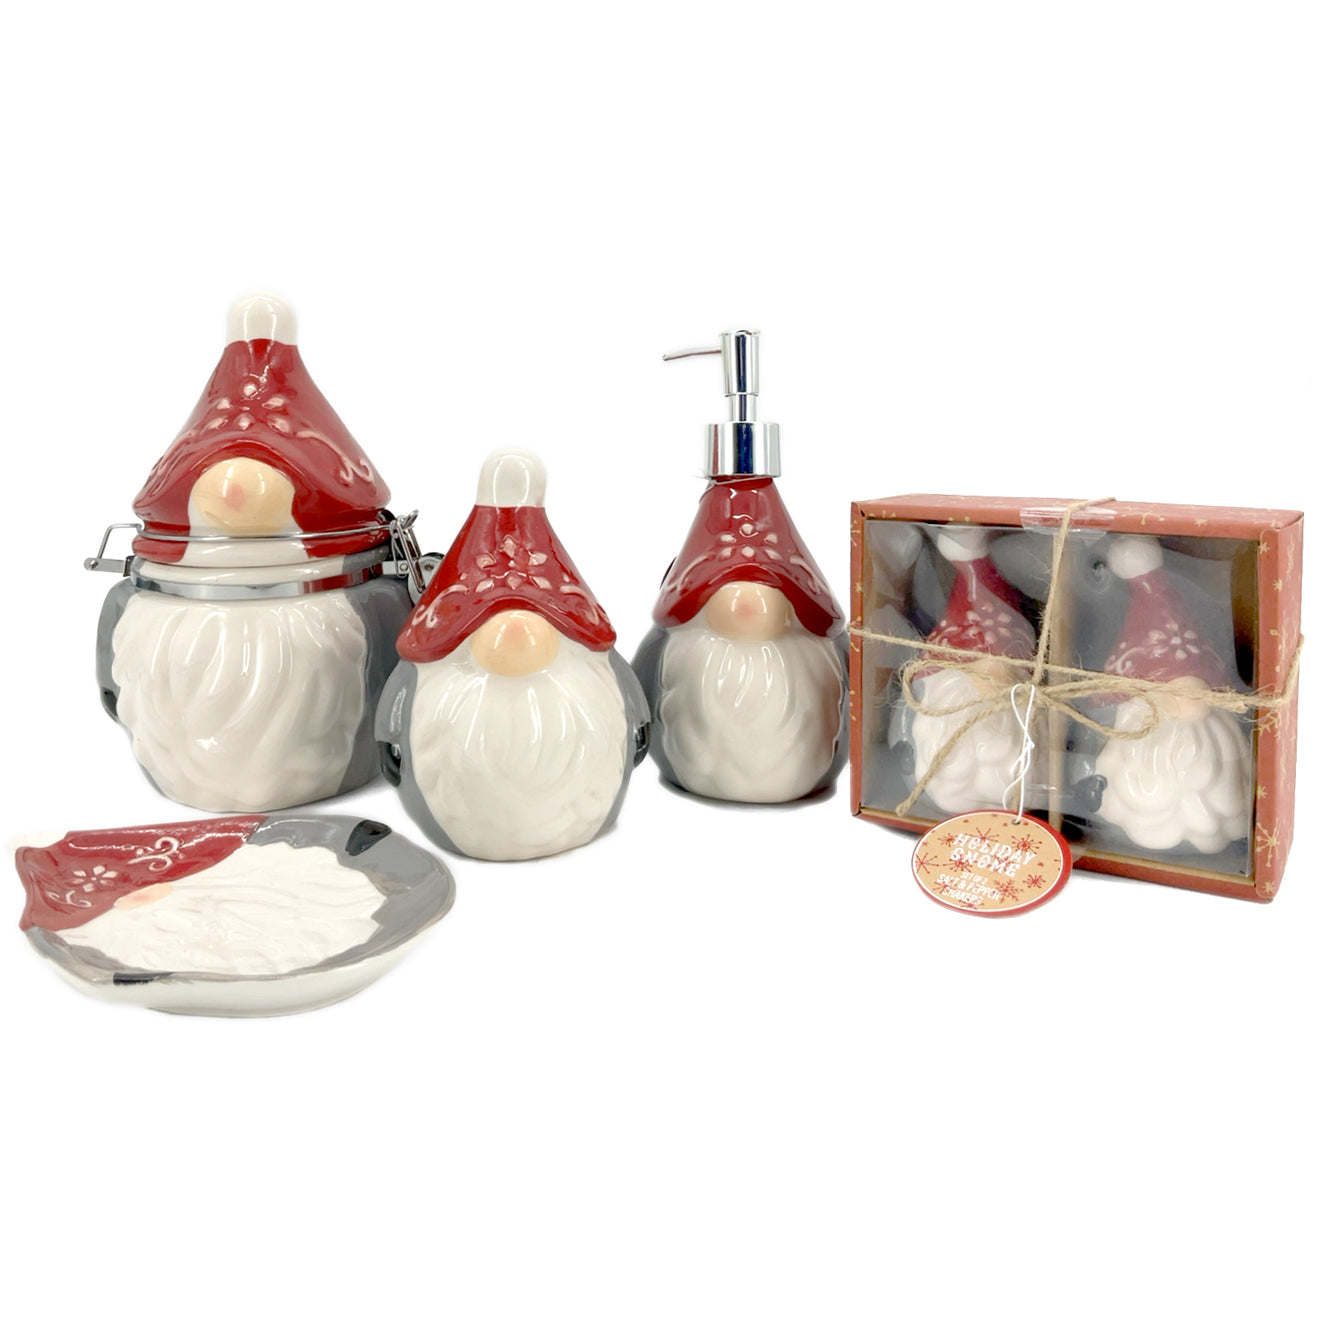 CHRISTMAS GNOME CERAMICS SET OF 5 Includes: Hinged Canister, Soap Pump, Scrubby Holder, Spoon Rest, And Set of 2 Salt and Pepper Shakers